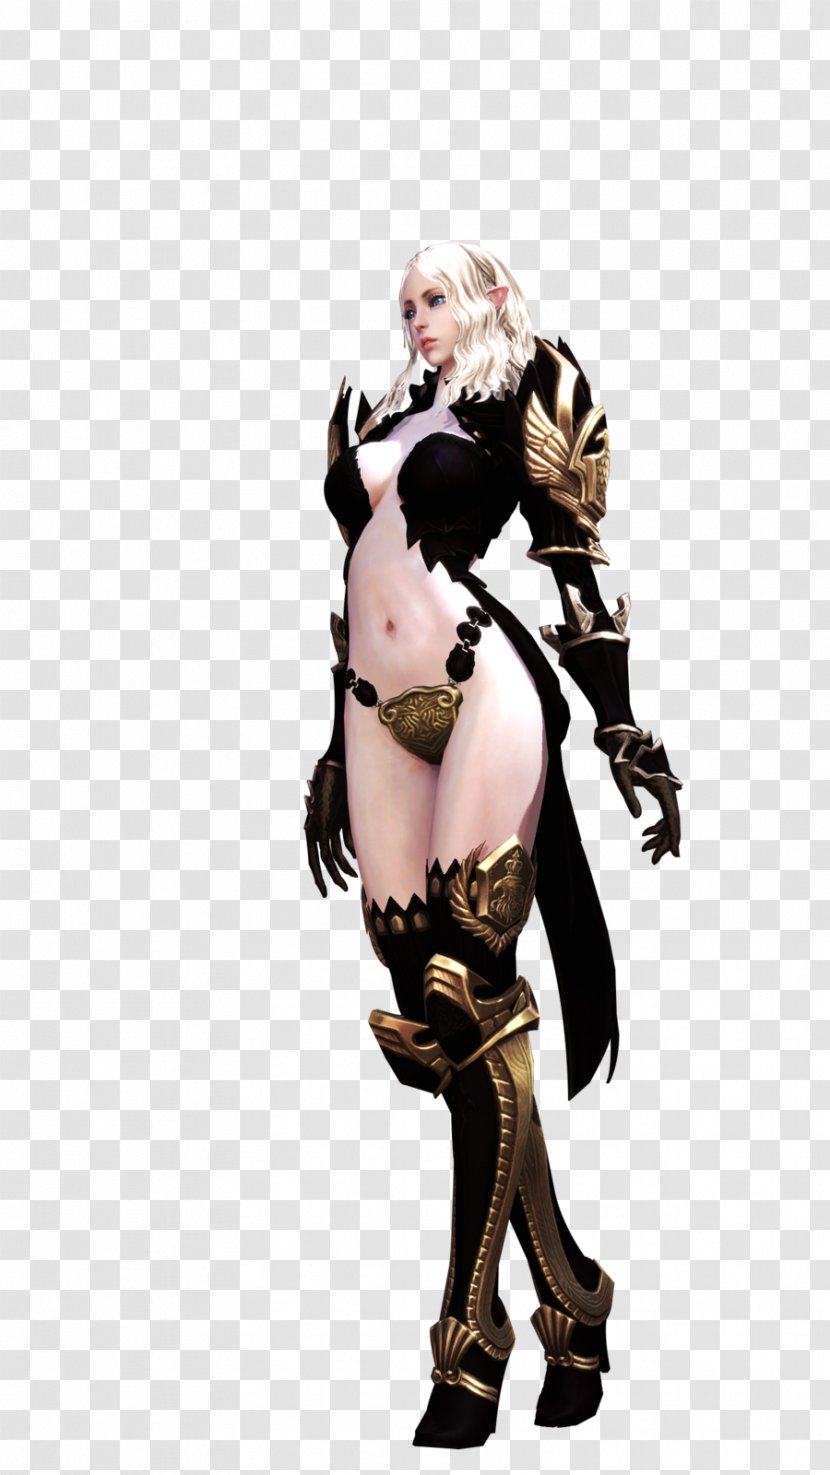 TERA Aion Rendering - Silhouette - Tera Transparent PNG